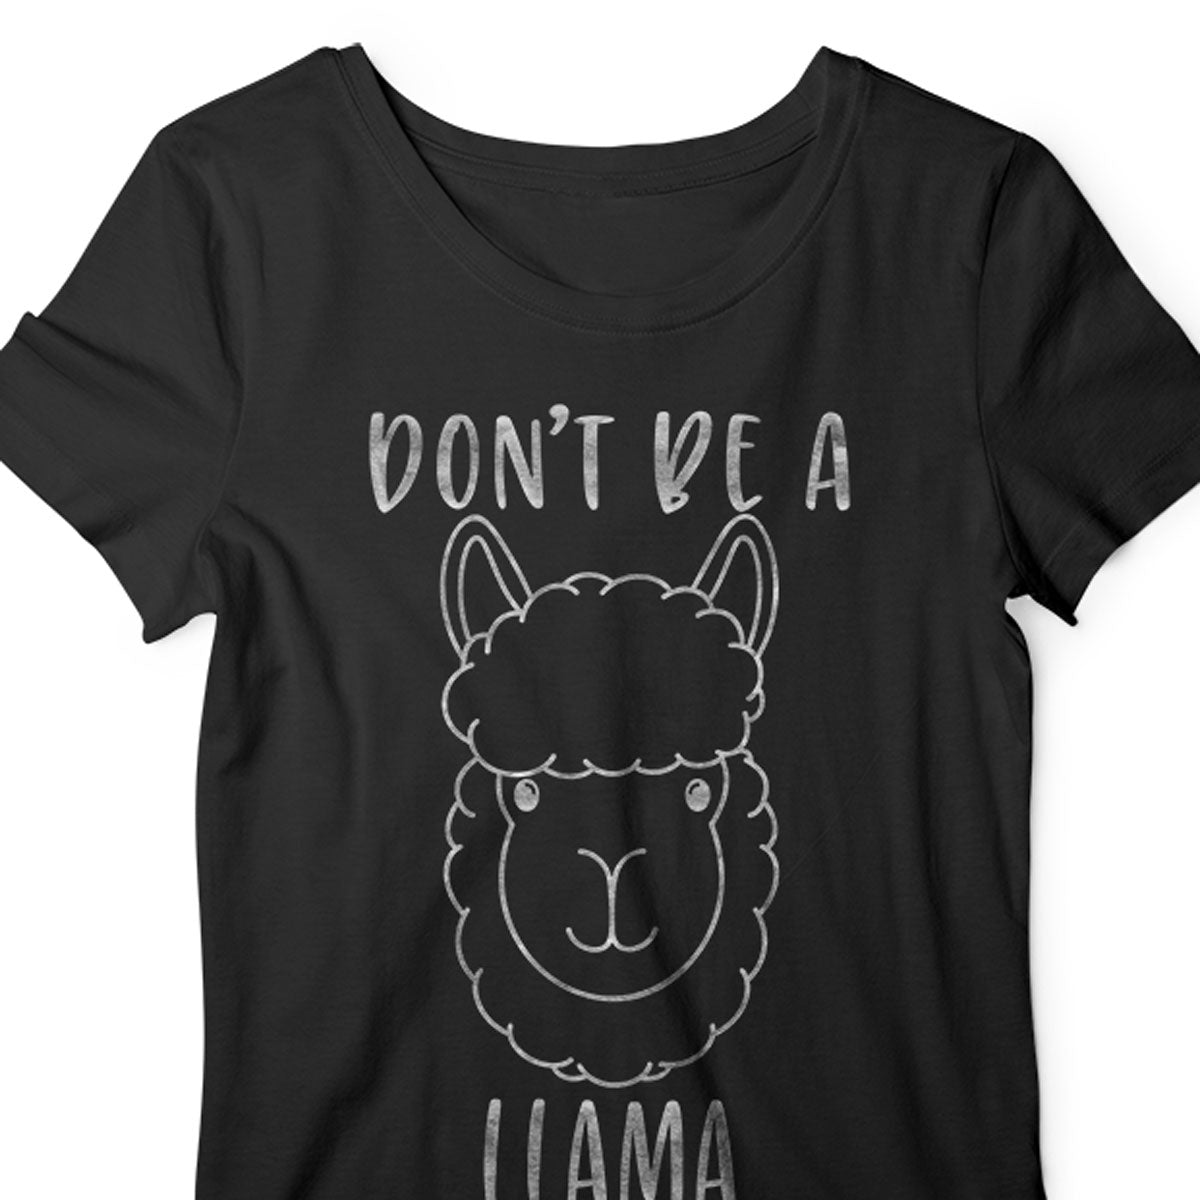 Don't Be a Llama svg cut file with hand drawn llama face - Free for Personal Use